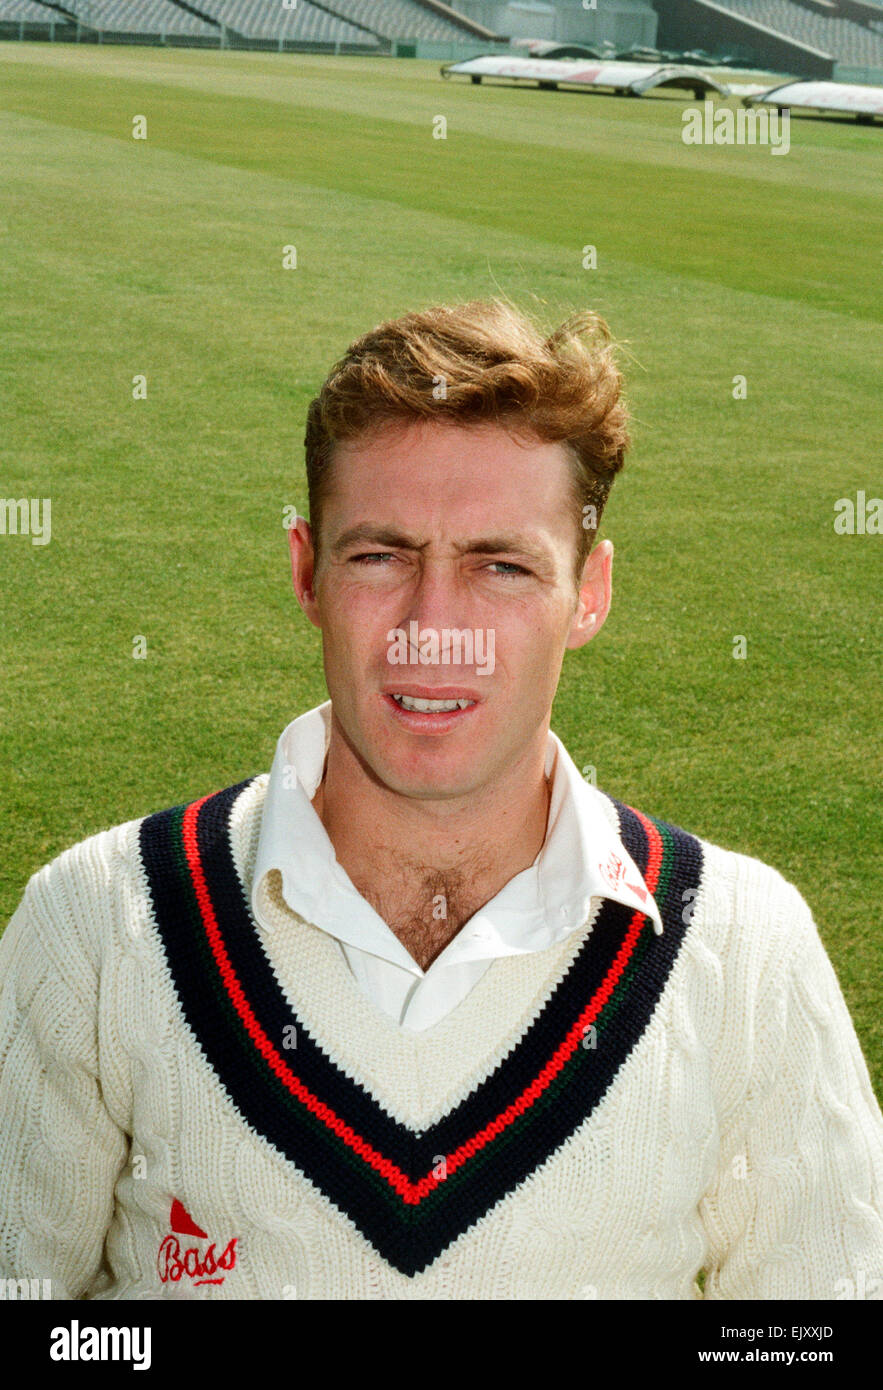 New Zealand and Lancashire cricketer Danny Morrison.  Pictured at Old Trafford playing for Lancashire in 1992.  10th April 1992. Stock Photo